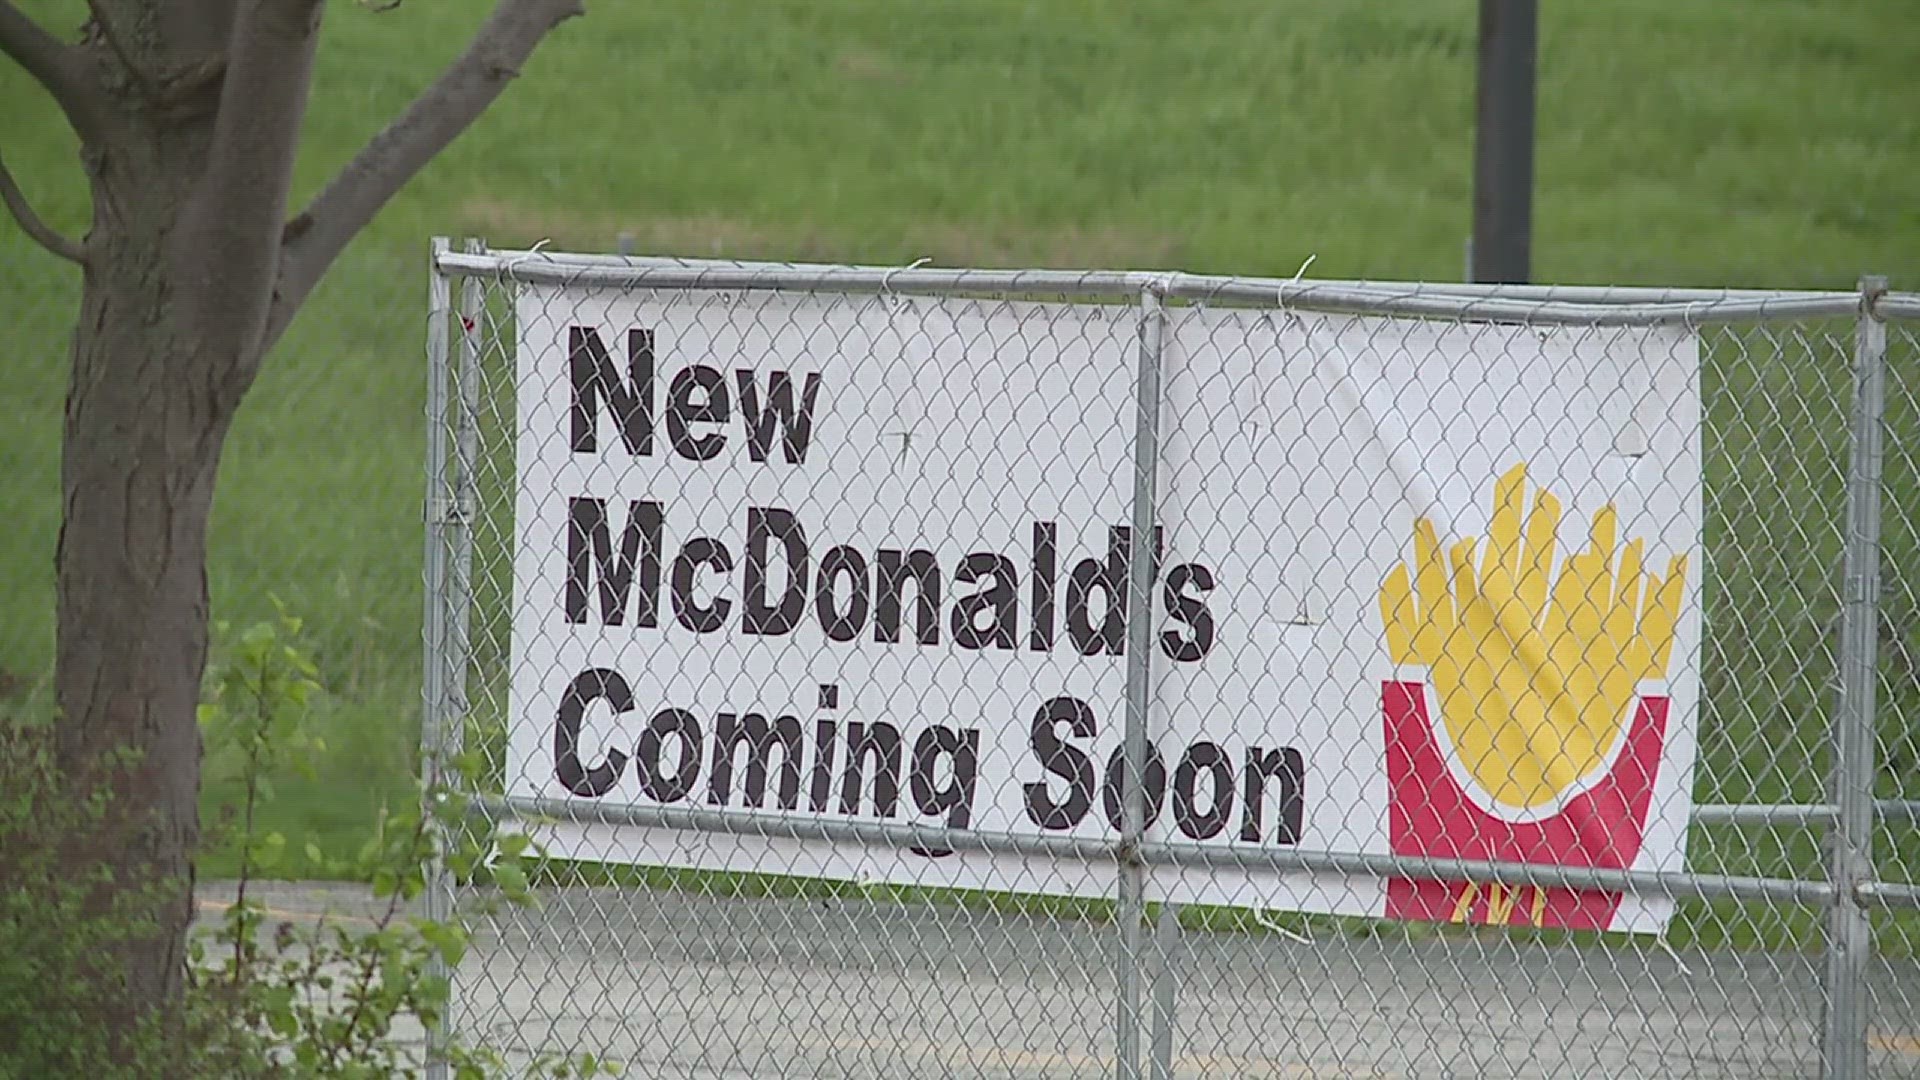 The newest Mickey D's will be built near Target and Kohl's in southwest Moline. Its anticipated open date is not yet known.